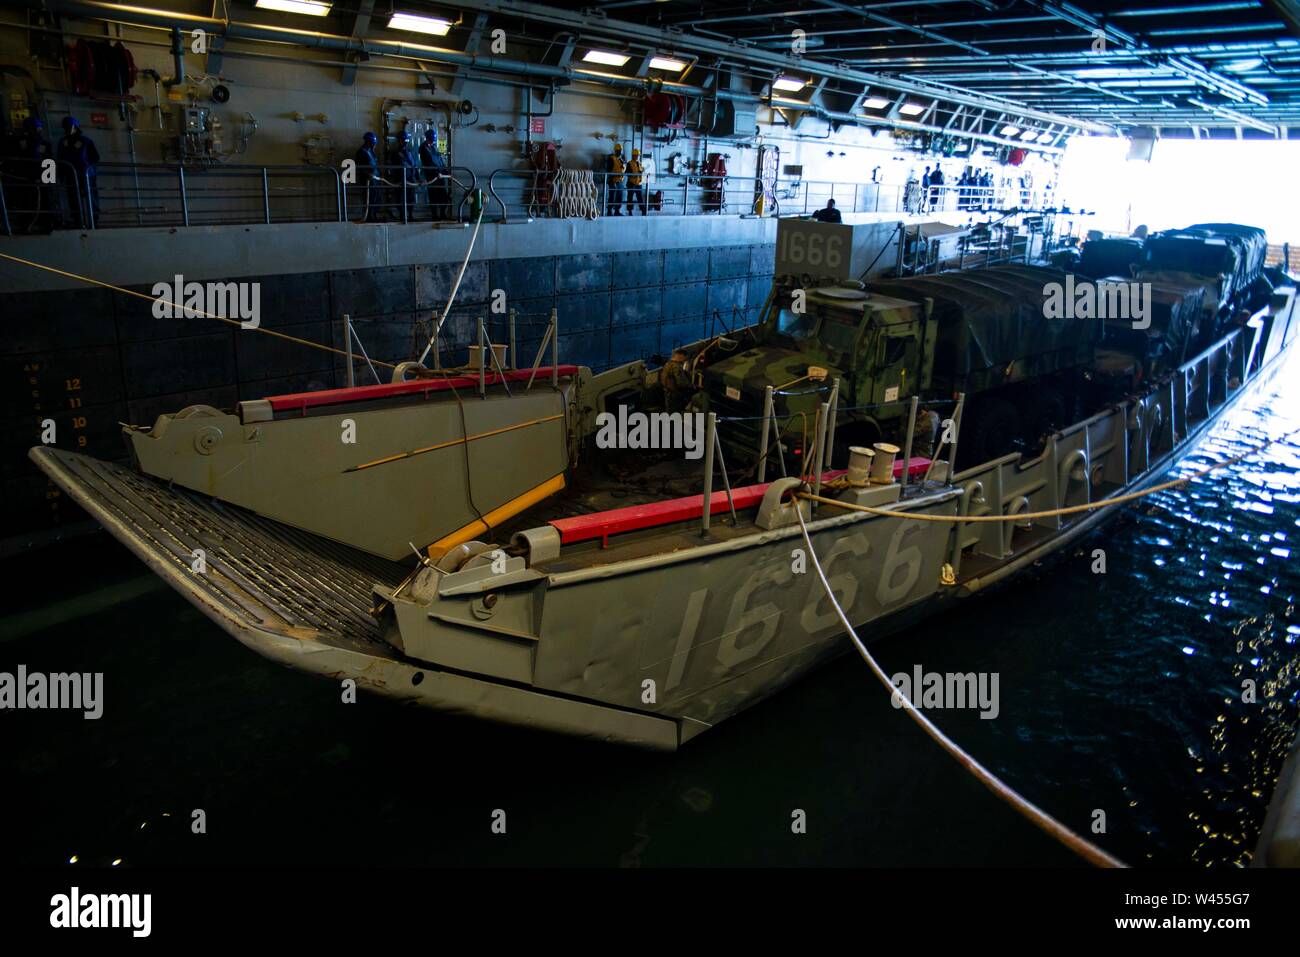 190719-N-DX072-1093 STANAGE BAY, Australia (July 19, 2019) Landing Craft, Utility (LCU) 1666 enters the well deck of the amphibious transport dock ship USS Green Bay (LPD 20). Green Bay, part of the Wasp Expeditionary Strike Group, with embarked 31st Marine Expeditionary Unit, is currently participating in Talisman Sabre 2019 off the coast of Northern Australia. A bilateral, biennial event, Talisman Sabre is designed to improve U.S. and Australian combat training, readiness and interoperability through realistic, relevant training necessary to maintain regional security, peace and stability. ( Stock Photo